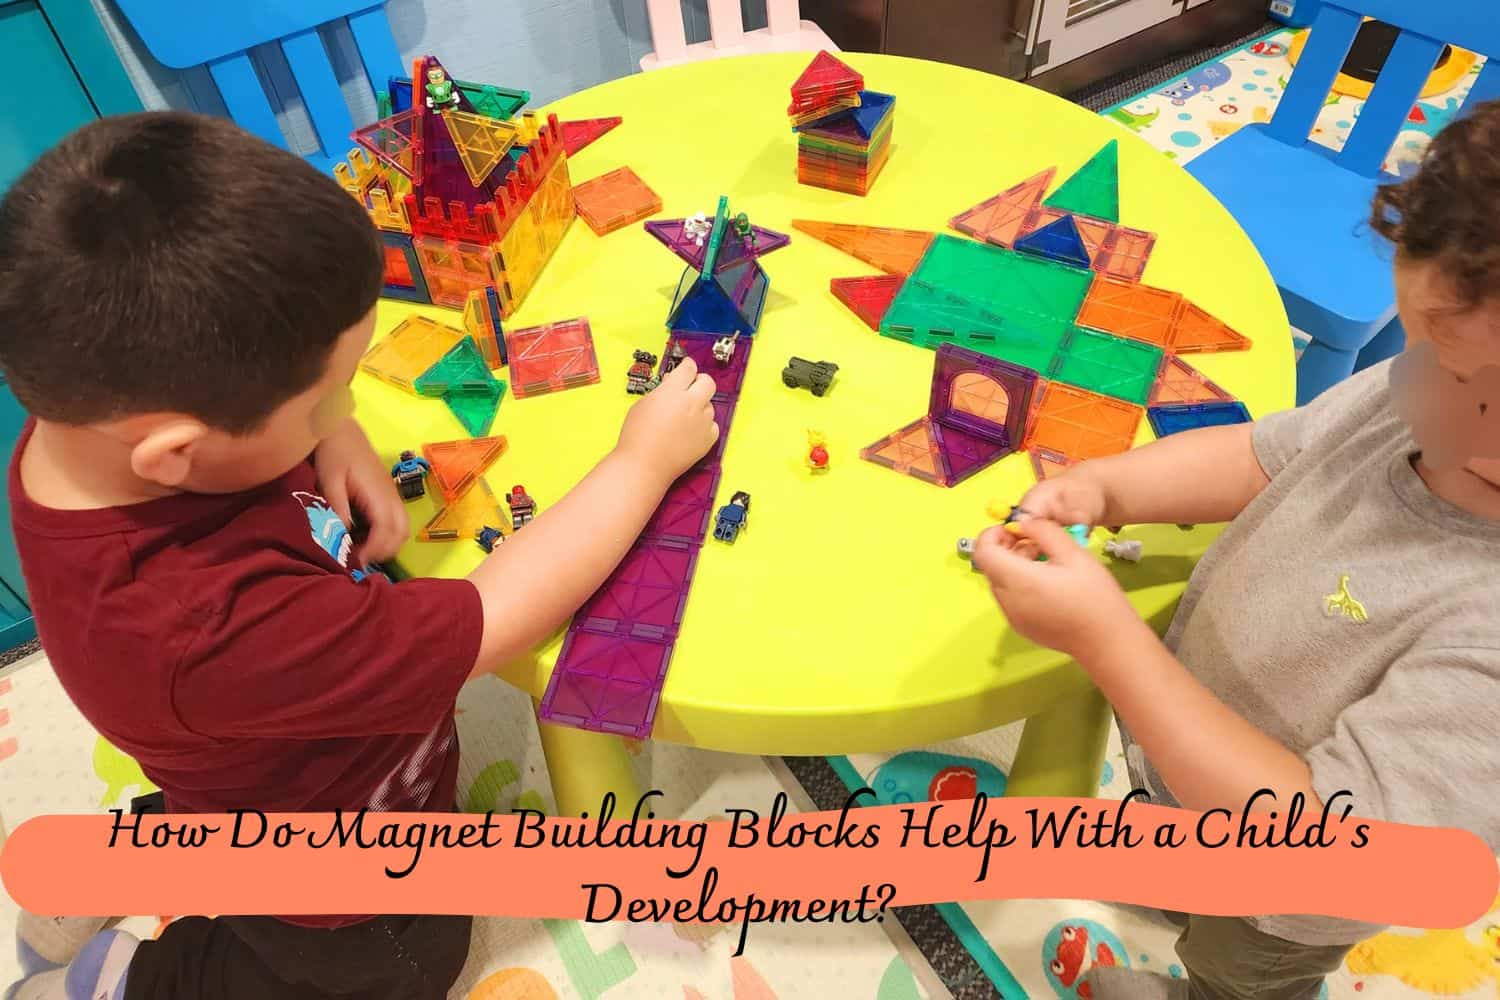 How Do Magnet Building Blocks Help With a Child's Development